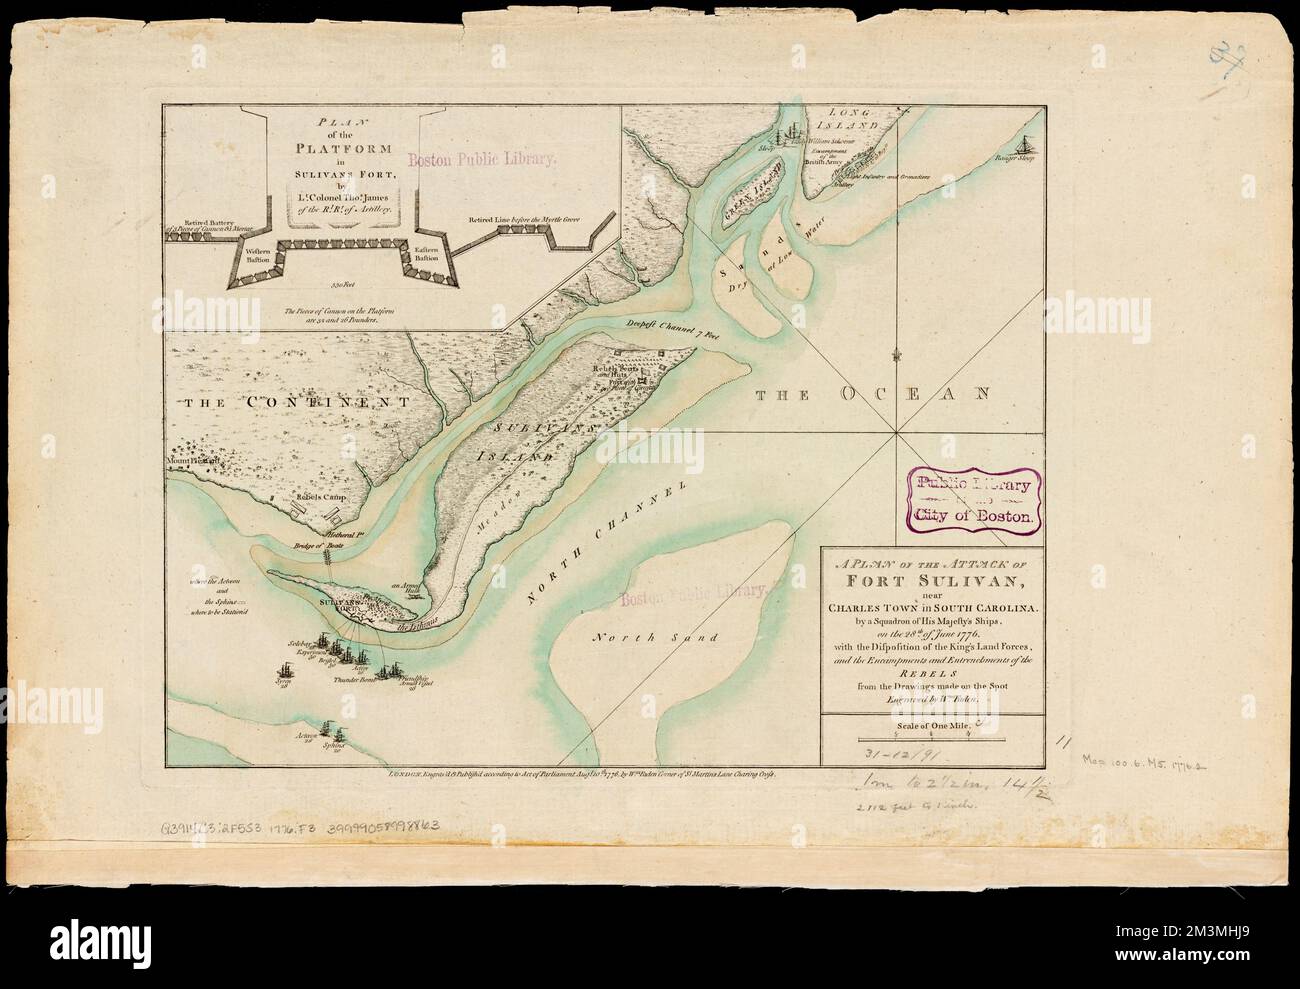 A plan of the attack of Fort Sulivan, near Charles Town in South Carolina : by a squadron of His Majesty's ships, on the 28th of June 1776, with the disposition of the King's land forces, and the encampments and entrenchments of the rebels from the drawings made on the spot , Fort Moultrie, Battle of, S.C., 1776, Maps, Early works to 1800, Fortification, South Carolina, Maps, Early works to 1800, Fort Moultrie S.C., History, Revolution, 1775-1783, Maps, Early works to 1800, Fort Sullivan S.C., History, Revolution, 1775-1783, Maps, Early works to 1800 Norman B. Leventhal Map Center Collection Stock Photo